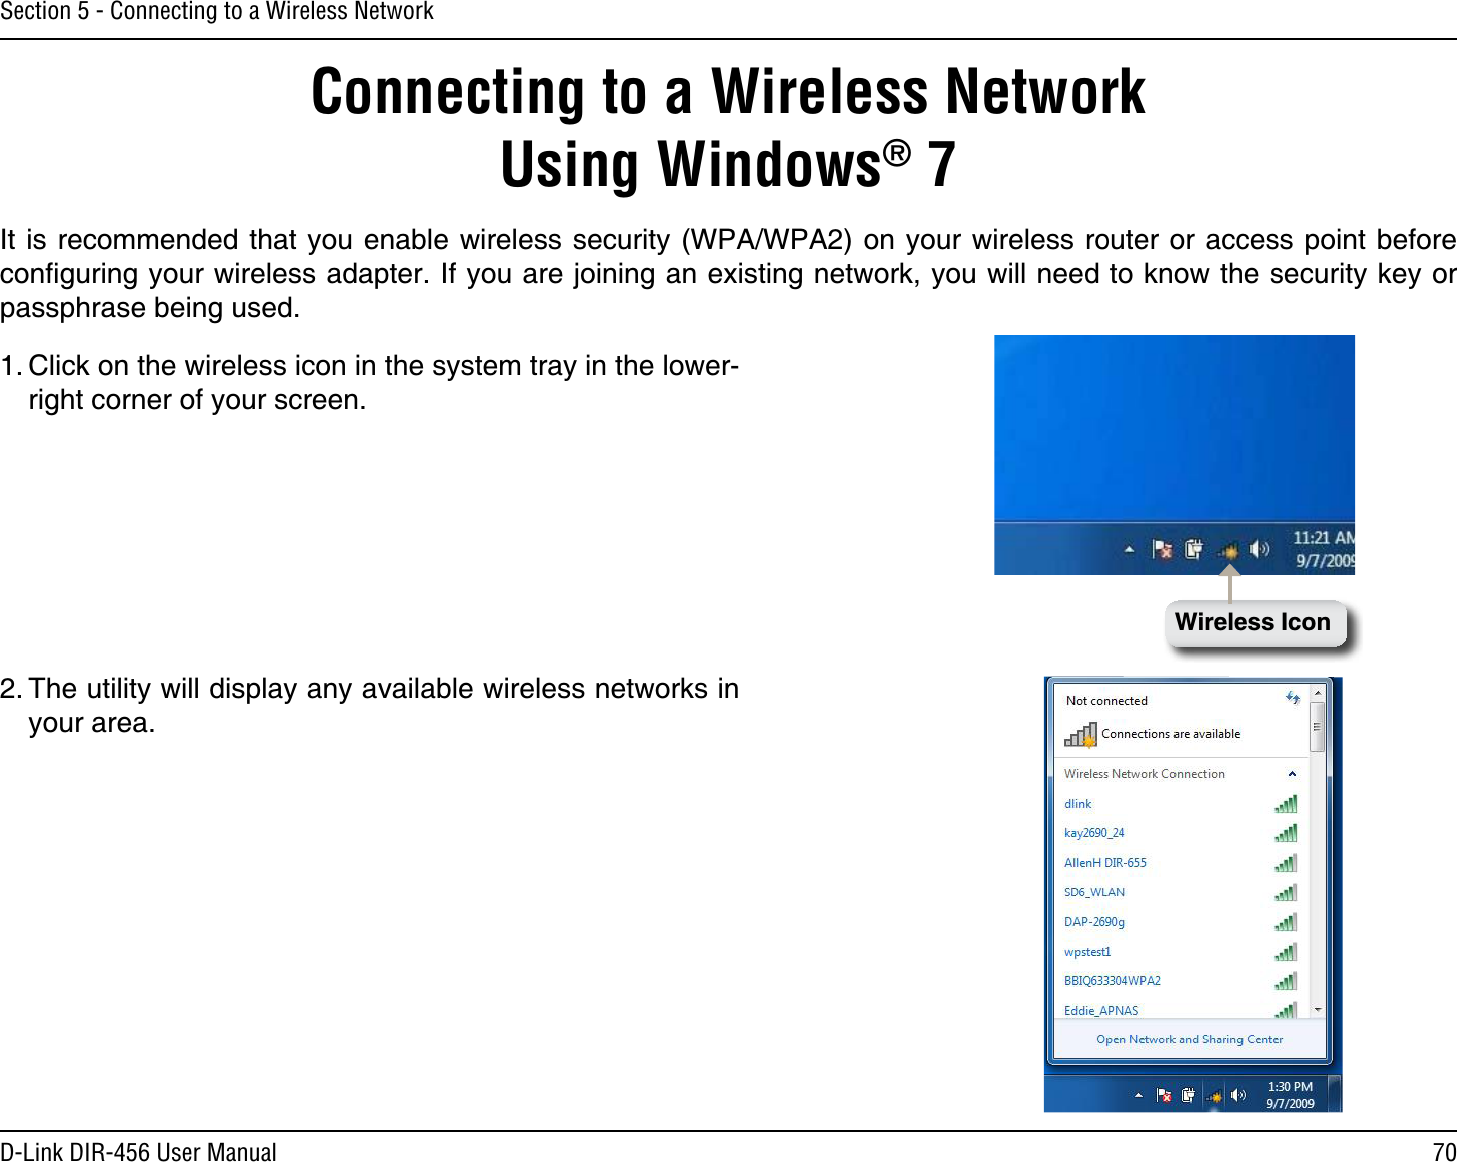 70D-Link DIR-456 User ManualSection 5 - Connecting to a Wireless NetworkConnecting to a Wireless Network  Using Windows® 7It is recommended that you enable wireless security (WPA/WPA2) on your wireless router or access point before conﬁguring your wireless adapter. If you are joining an existing network, you will need to know the security key or passphrase being used.2. The utility will display any available wireless networks in your area.1. Click on the wireless icon in the system tray in the lower-right corner of your screen.Wireless Icon